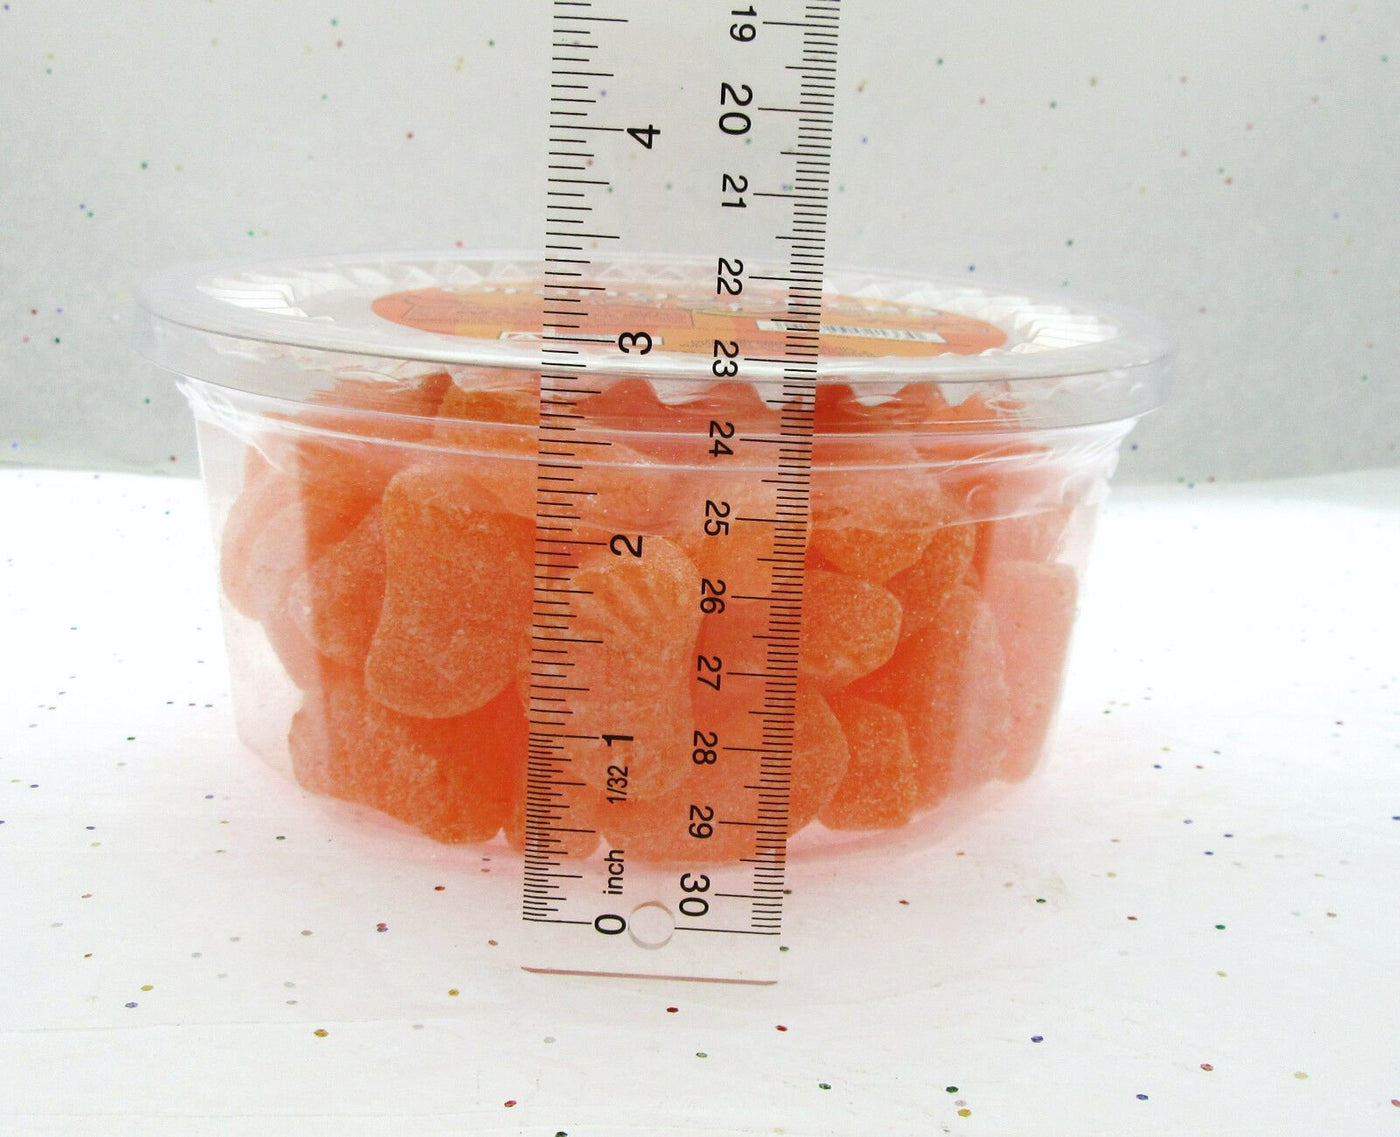 Orange Slices ~ Zachary Brand ~ Fruit Candy Naturally Flavored ~ 32oz Container